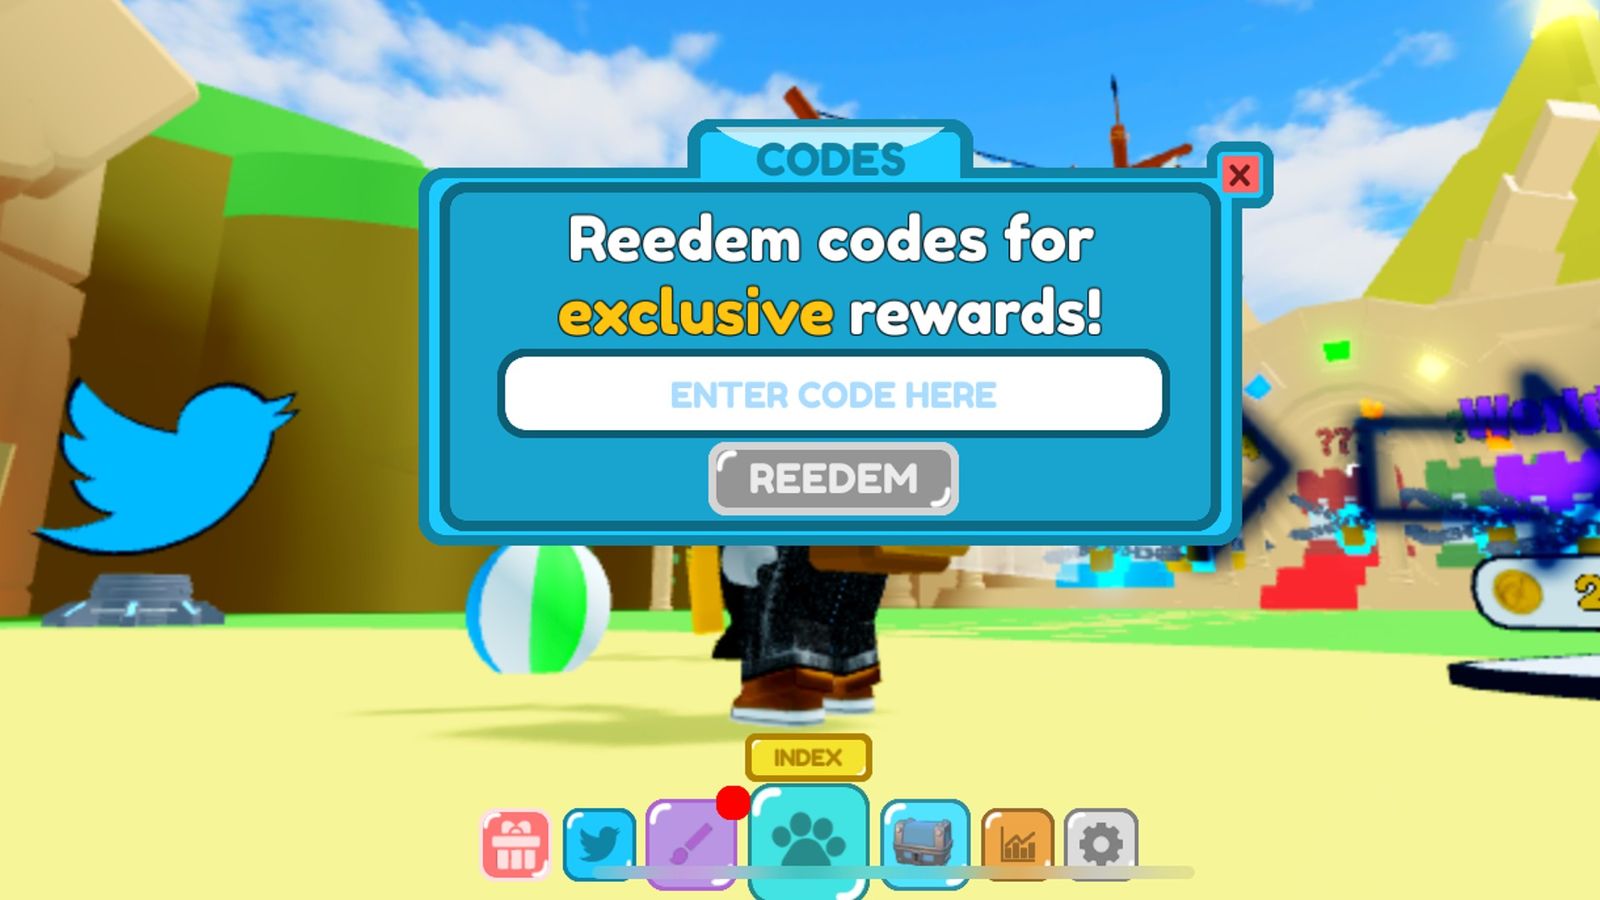 Image of the code redemption screen in Slashing Simulator.